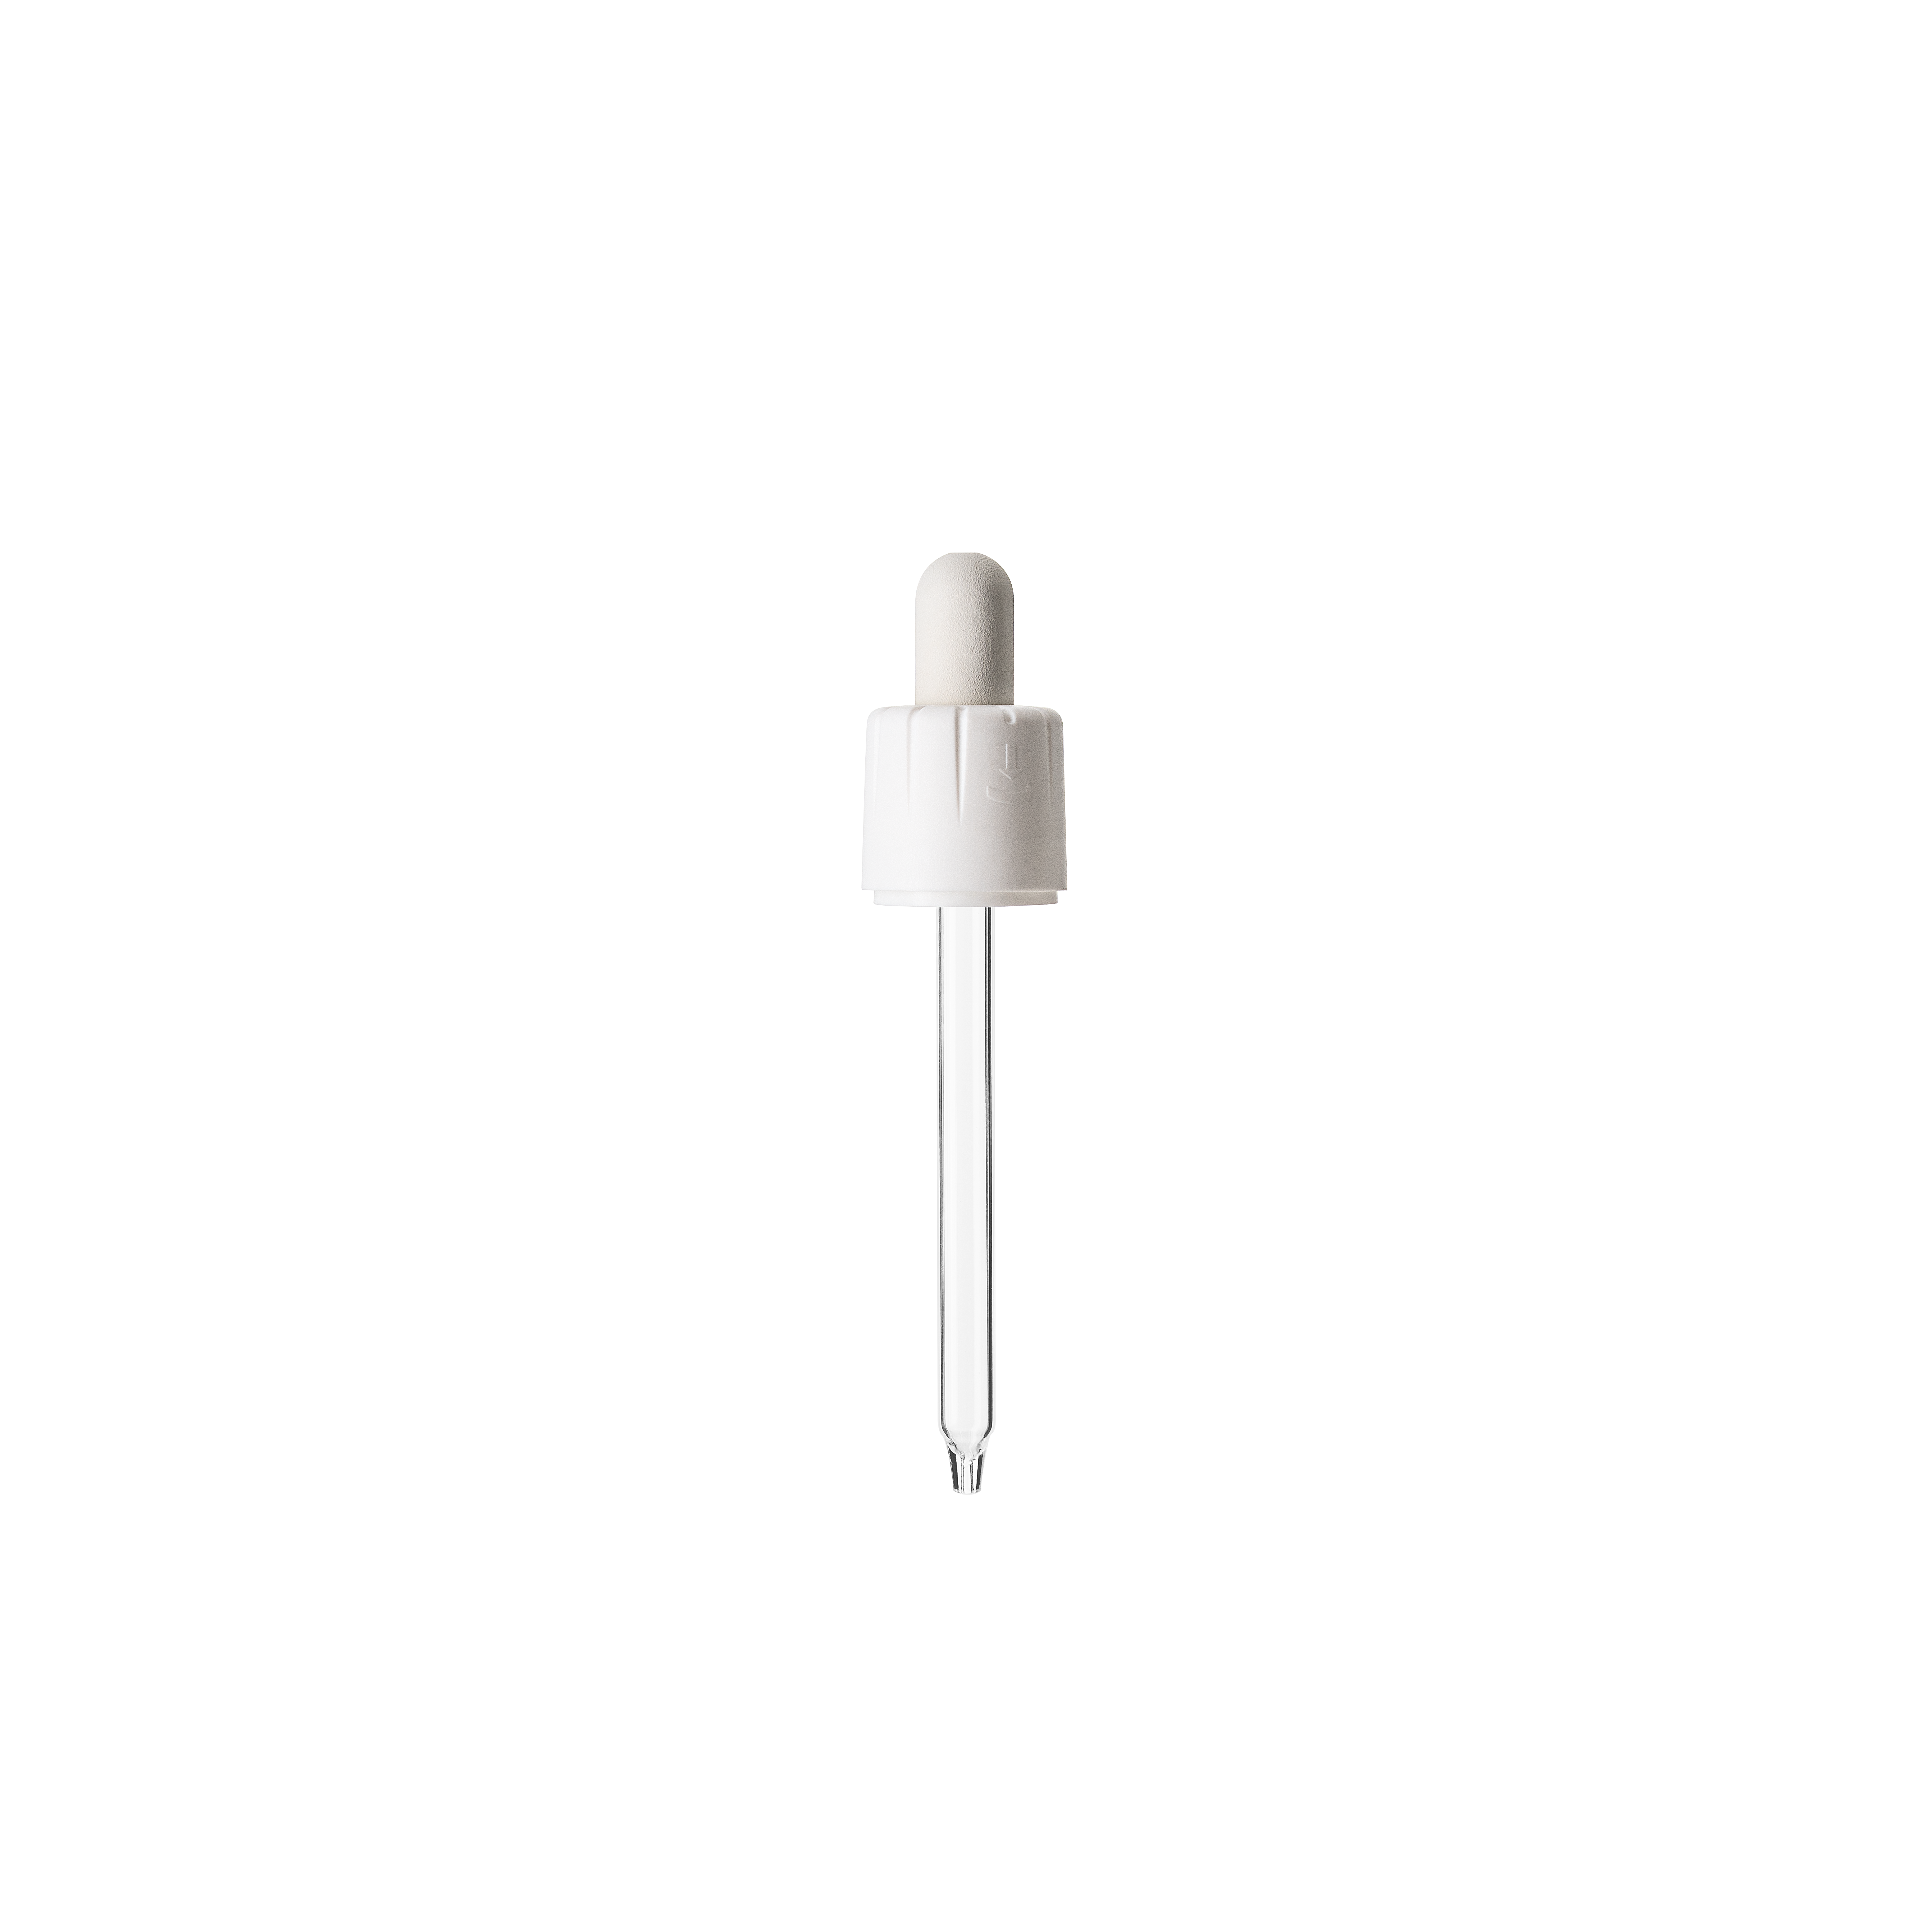 Child-resistant pipette series II, DIN18, tamper-evident, PP/PEHD, white, fine ribbed, white bulb NBR 1.0 ml, conical tip with 1.0 opening for Ginger 60 ml